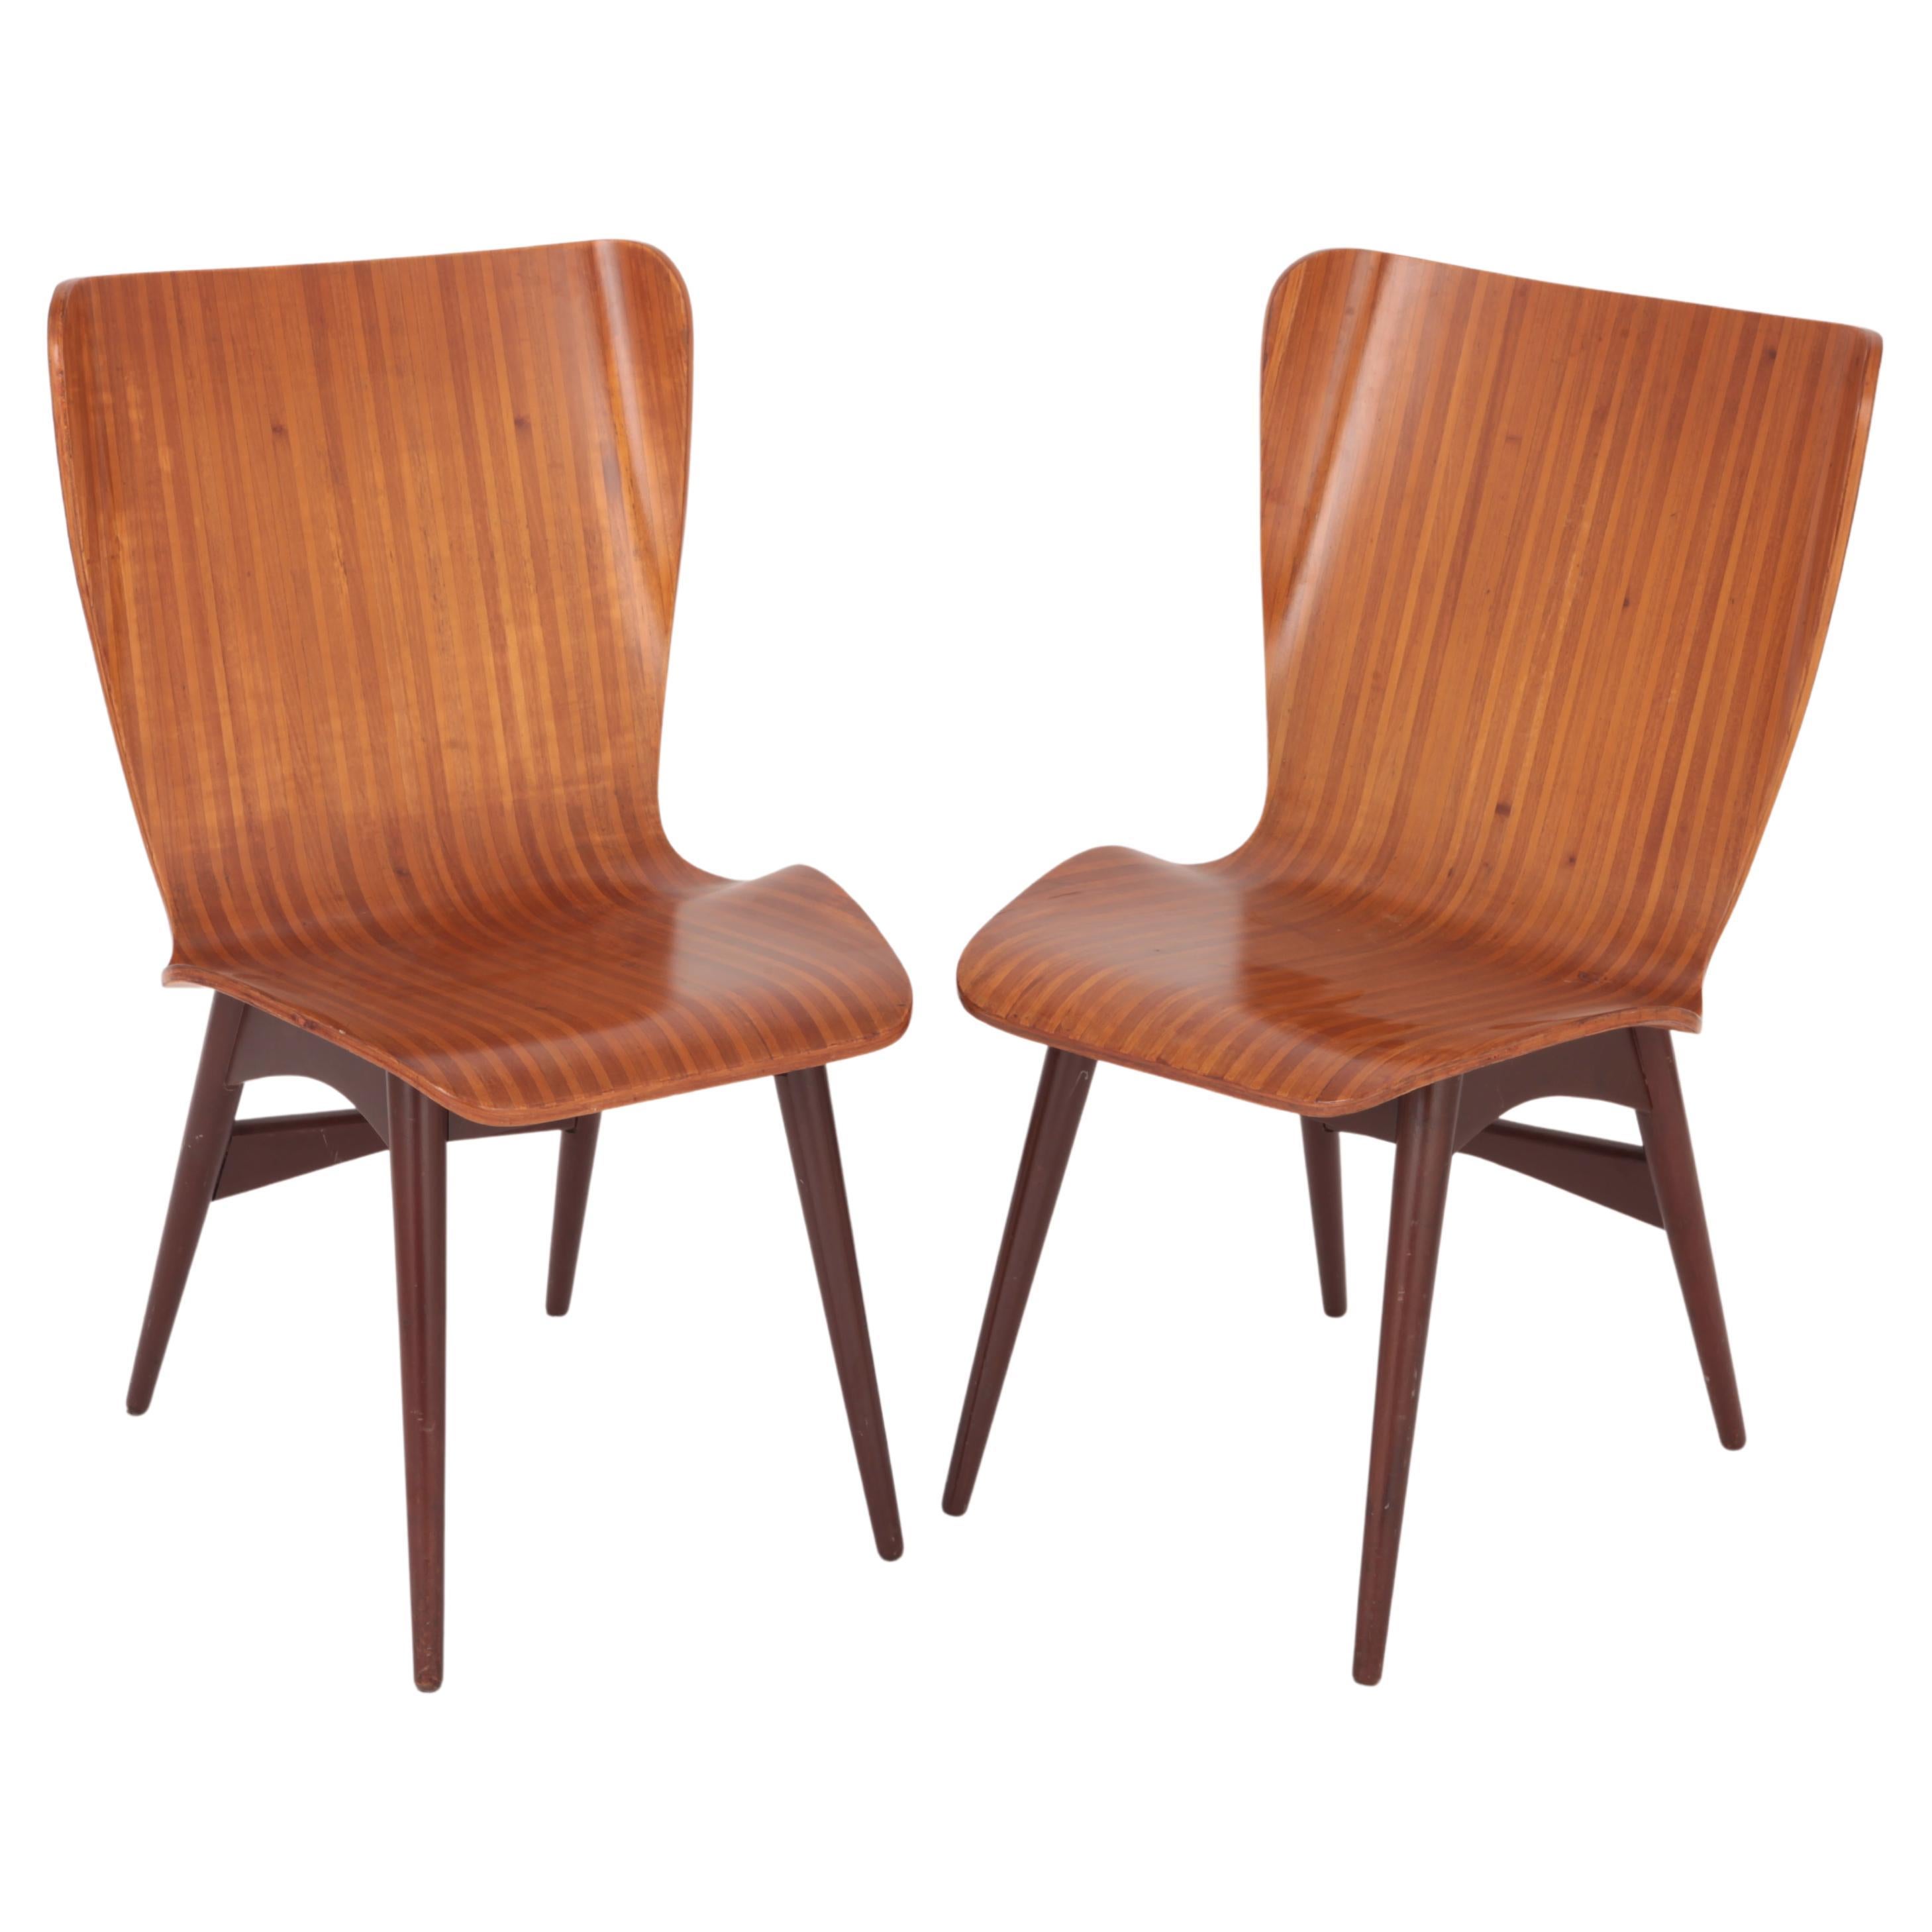 Pair of Chairs, Moveis Cimo, Brazil, 1960 For Sale